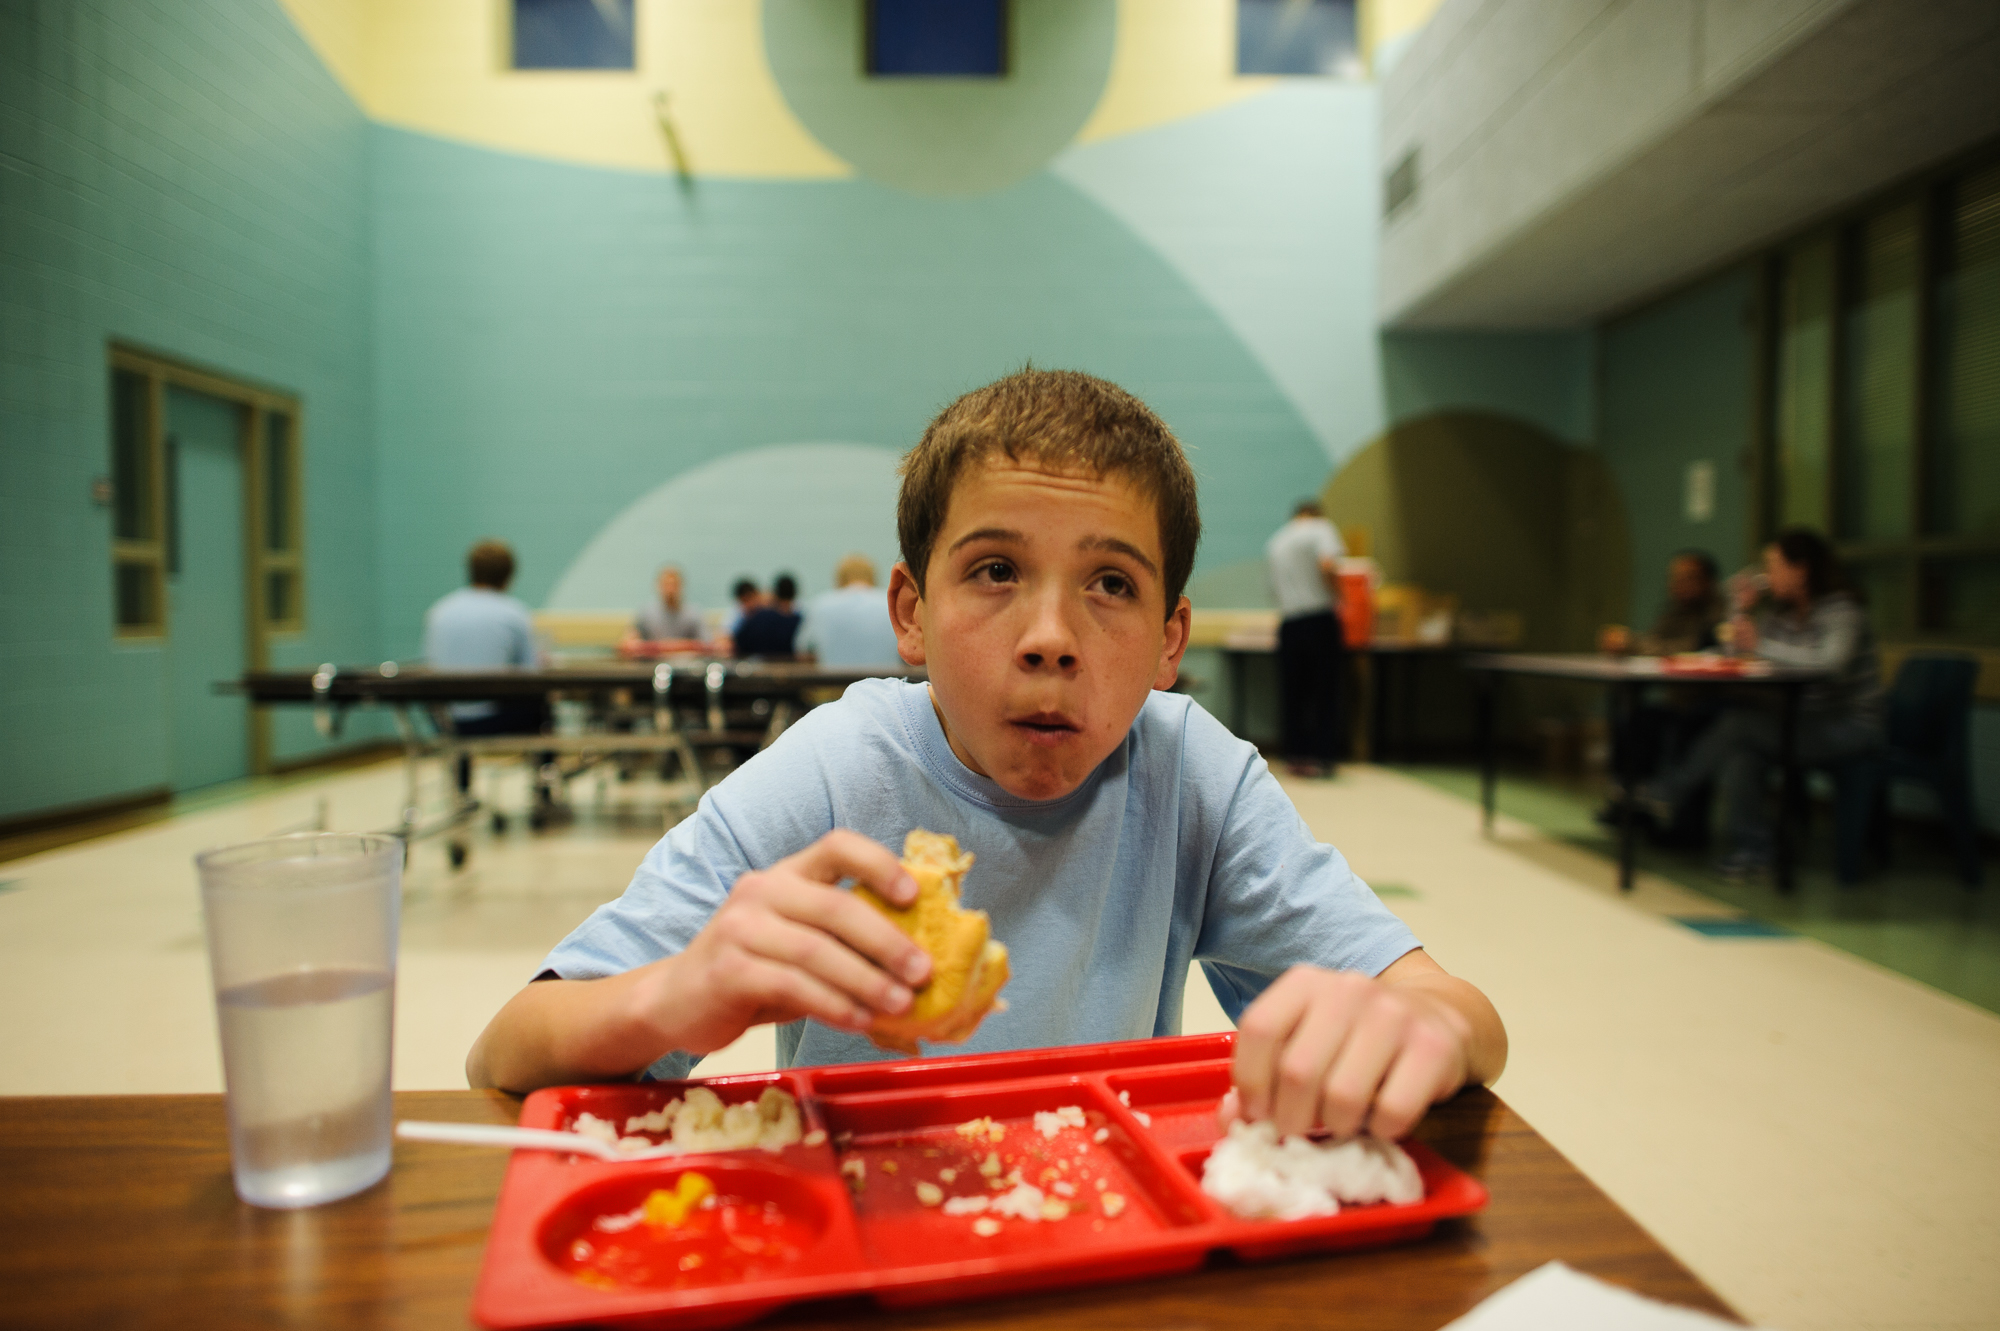  Vinny, age 13, eats his first meal in the detention center cafeteria, 2012. 